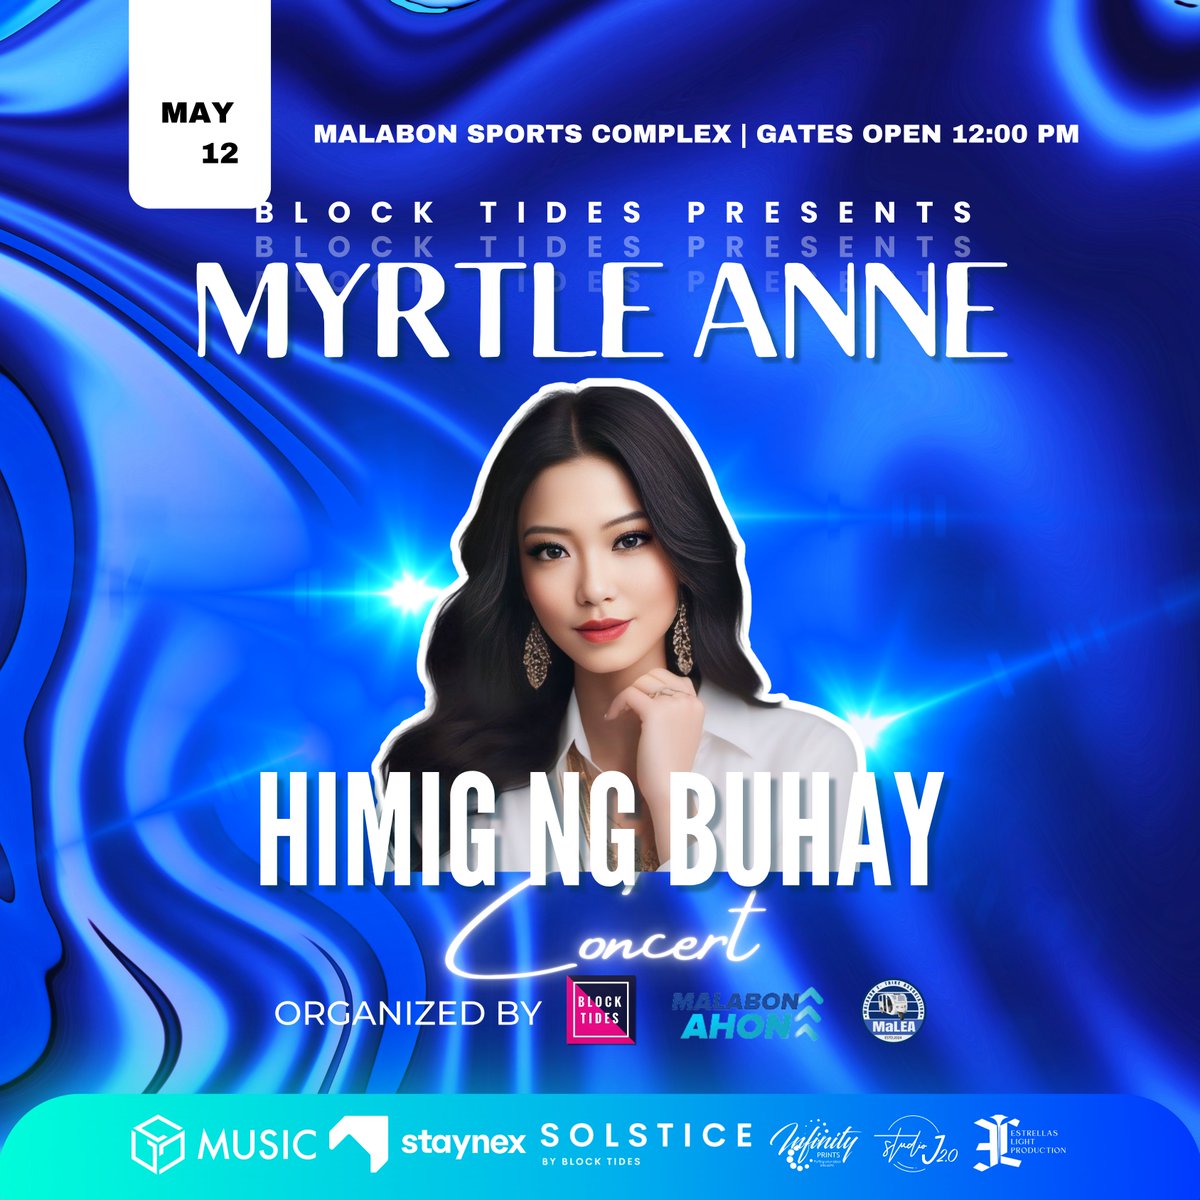 🌟 Get ready for a fantastic event at the Himig ng Buhay Concert in Malabon Sports Center! 🎶

🎉 We're excited to share that @myrtleology will be Performing at the concert, organized by Block Tides. ✨

🔥 Don't miss out on this unforgettable experience! 🤗

📅 Save the date: